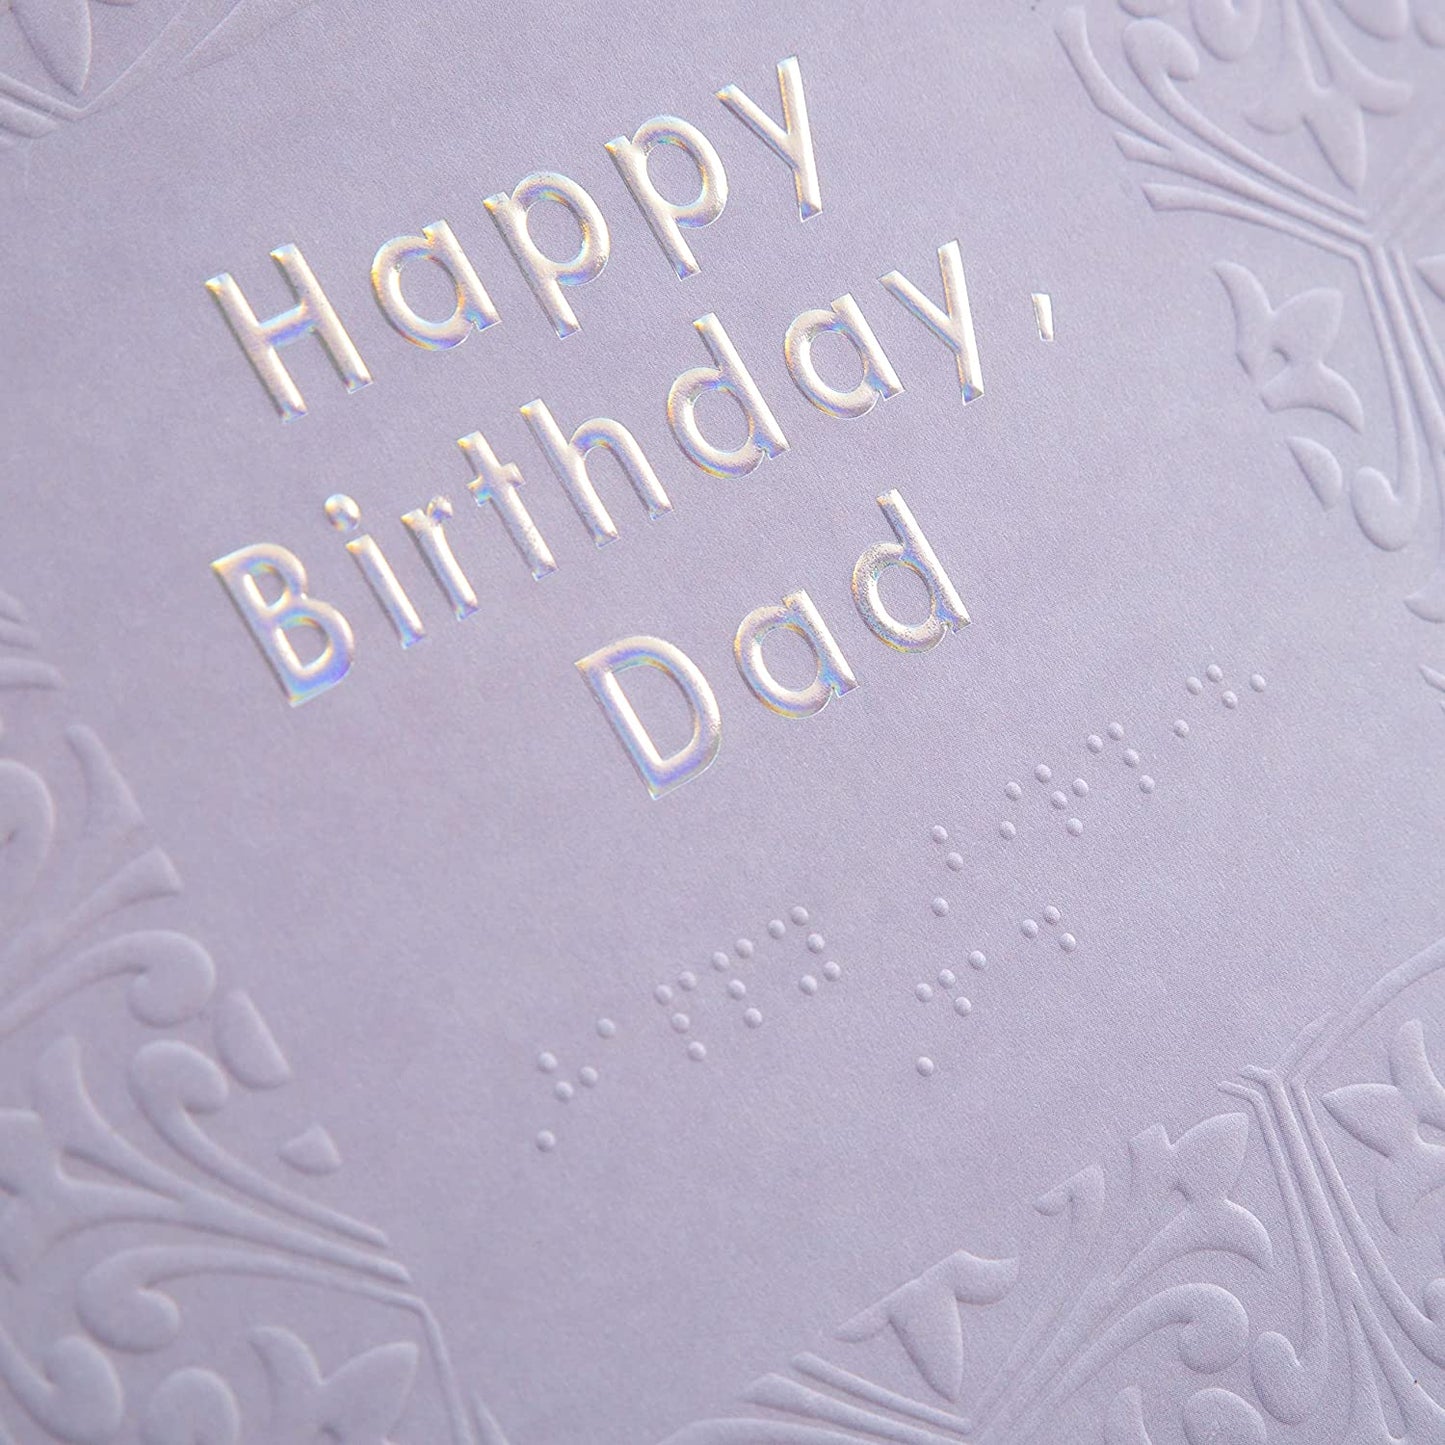 Dad Birthday Card Contemporary Patterned Design Braille 